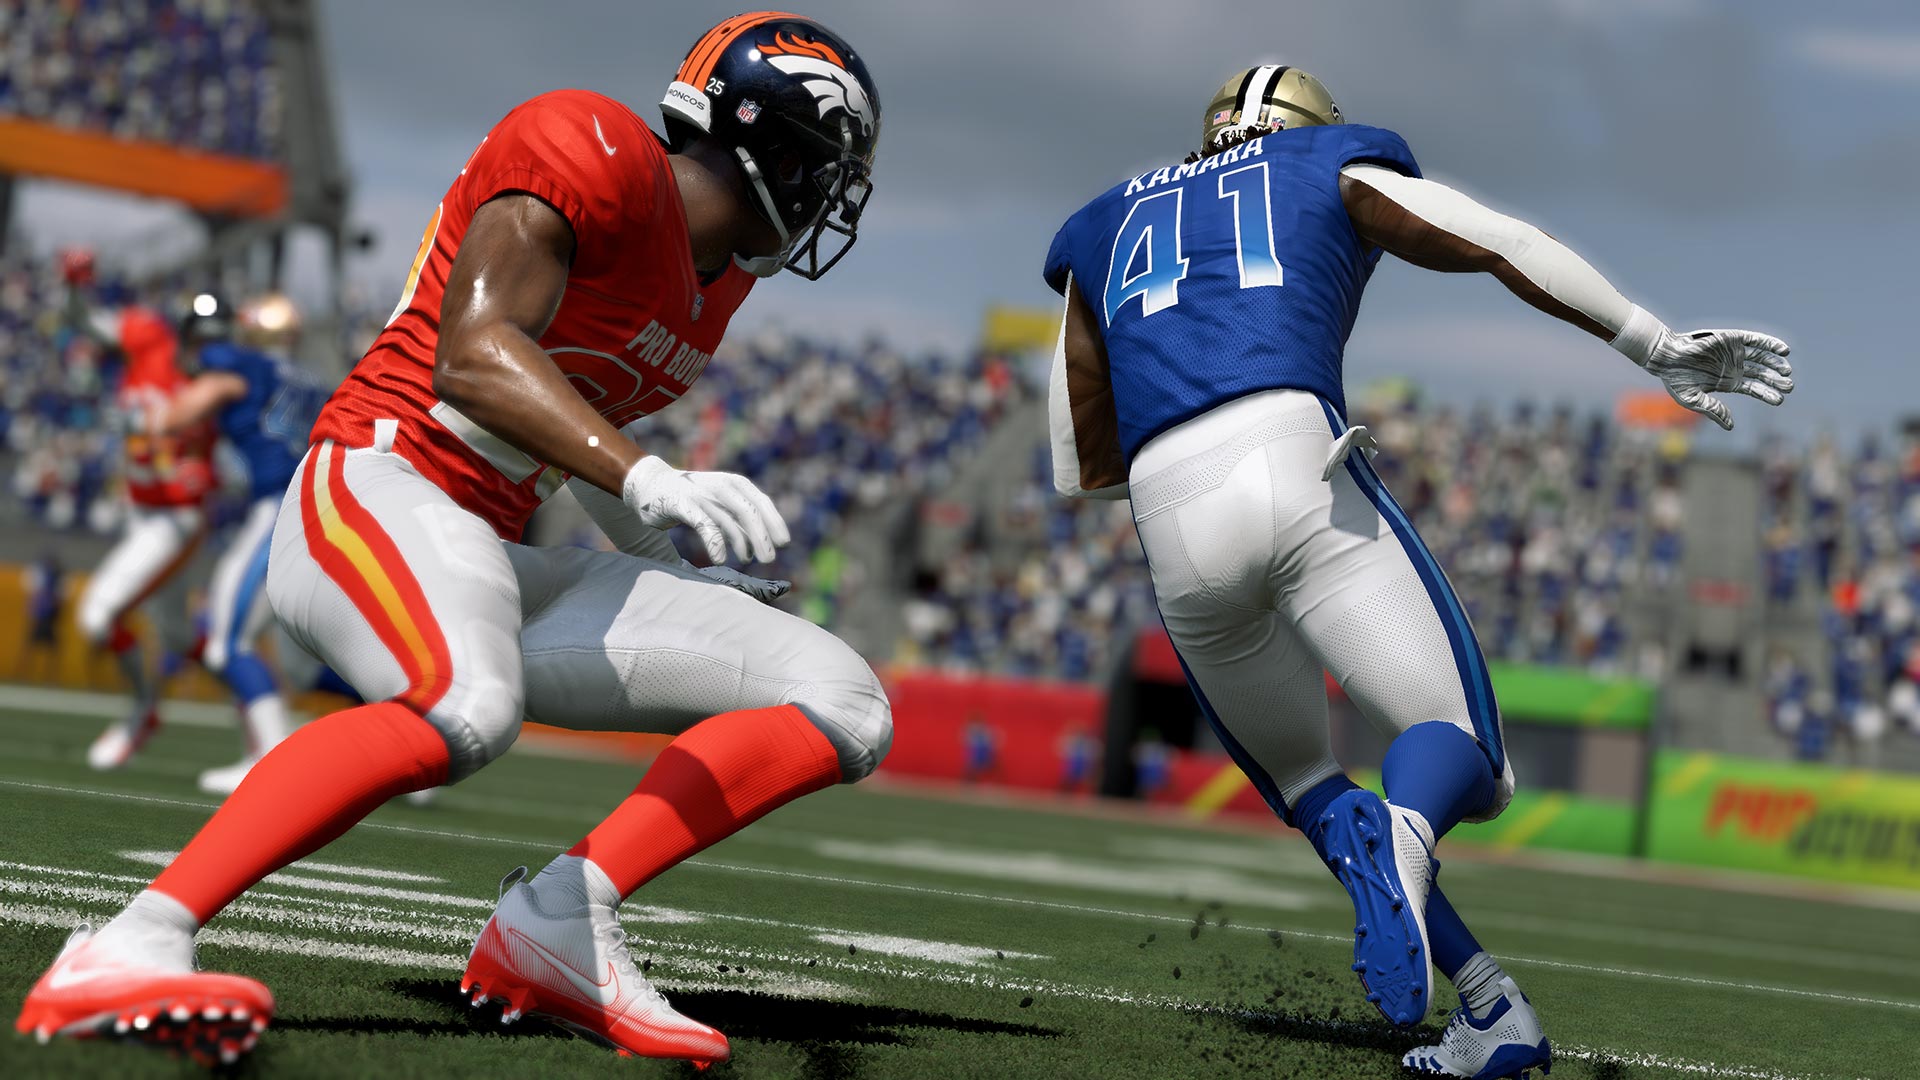 Madden NFL 20 PC Requirements